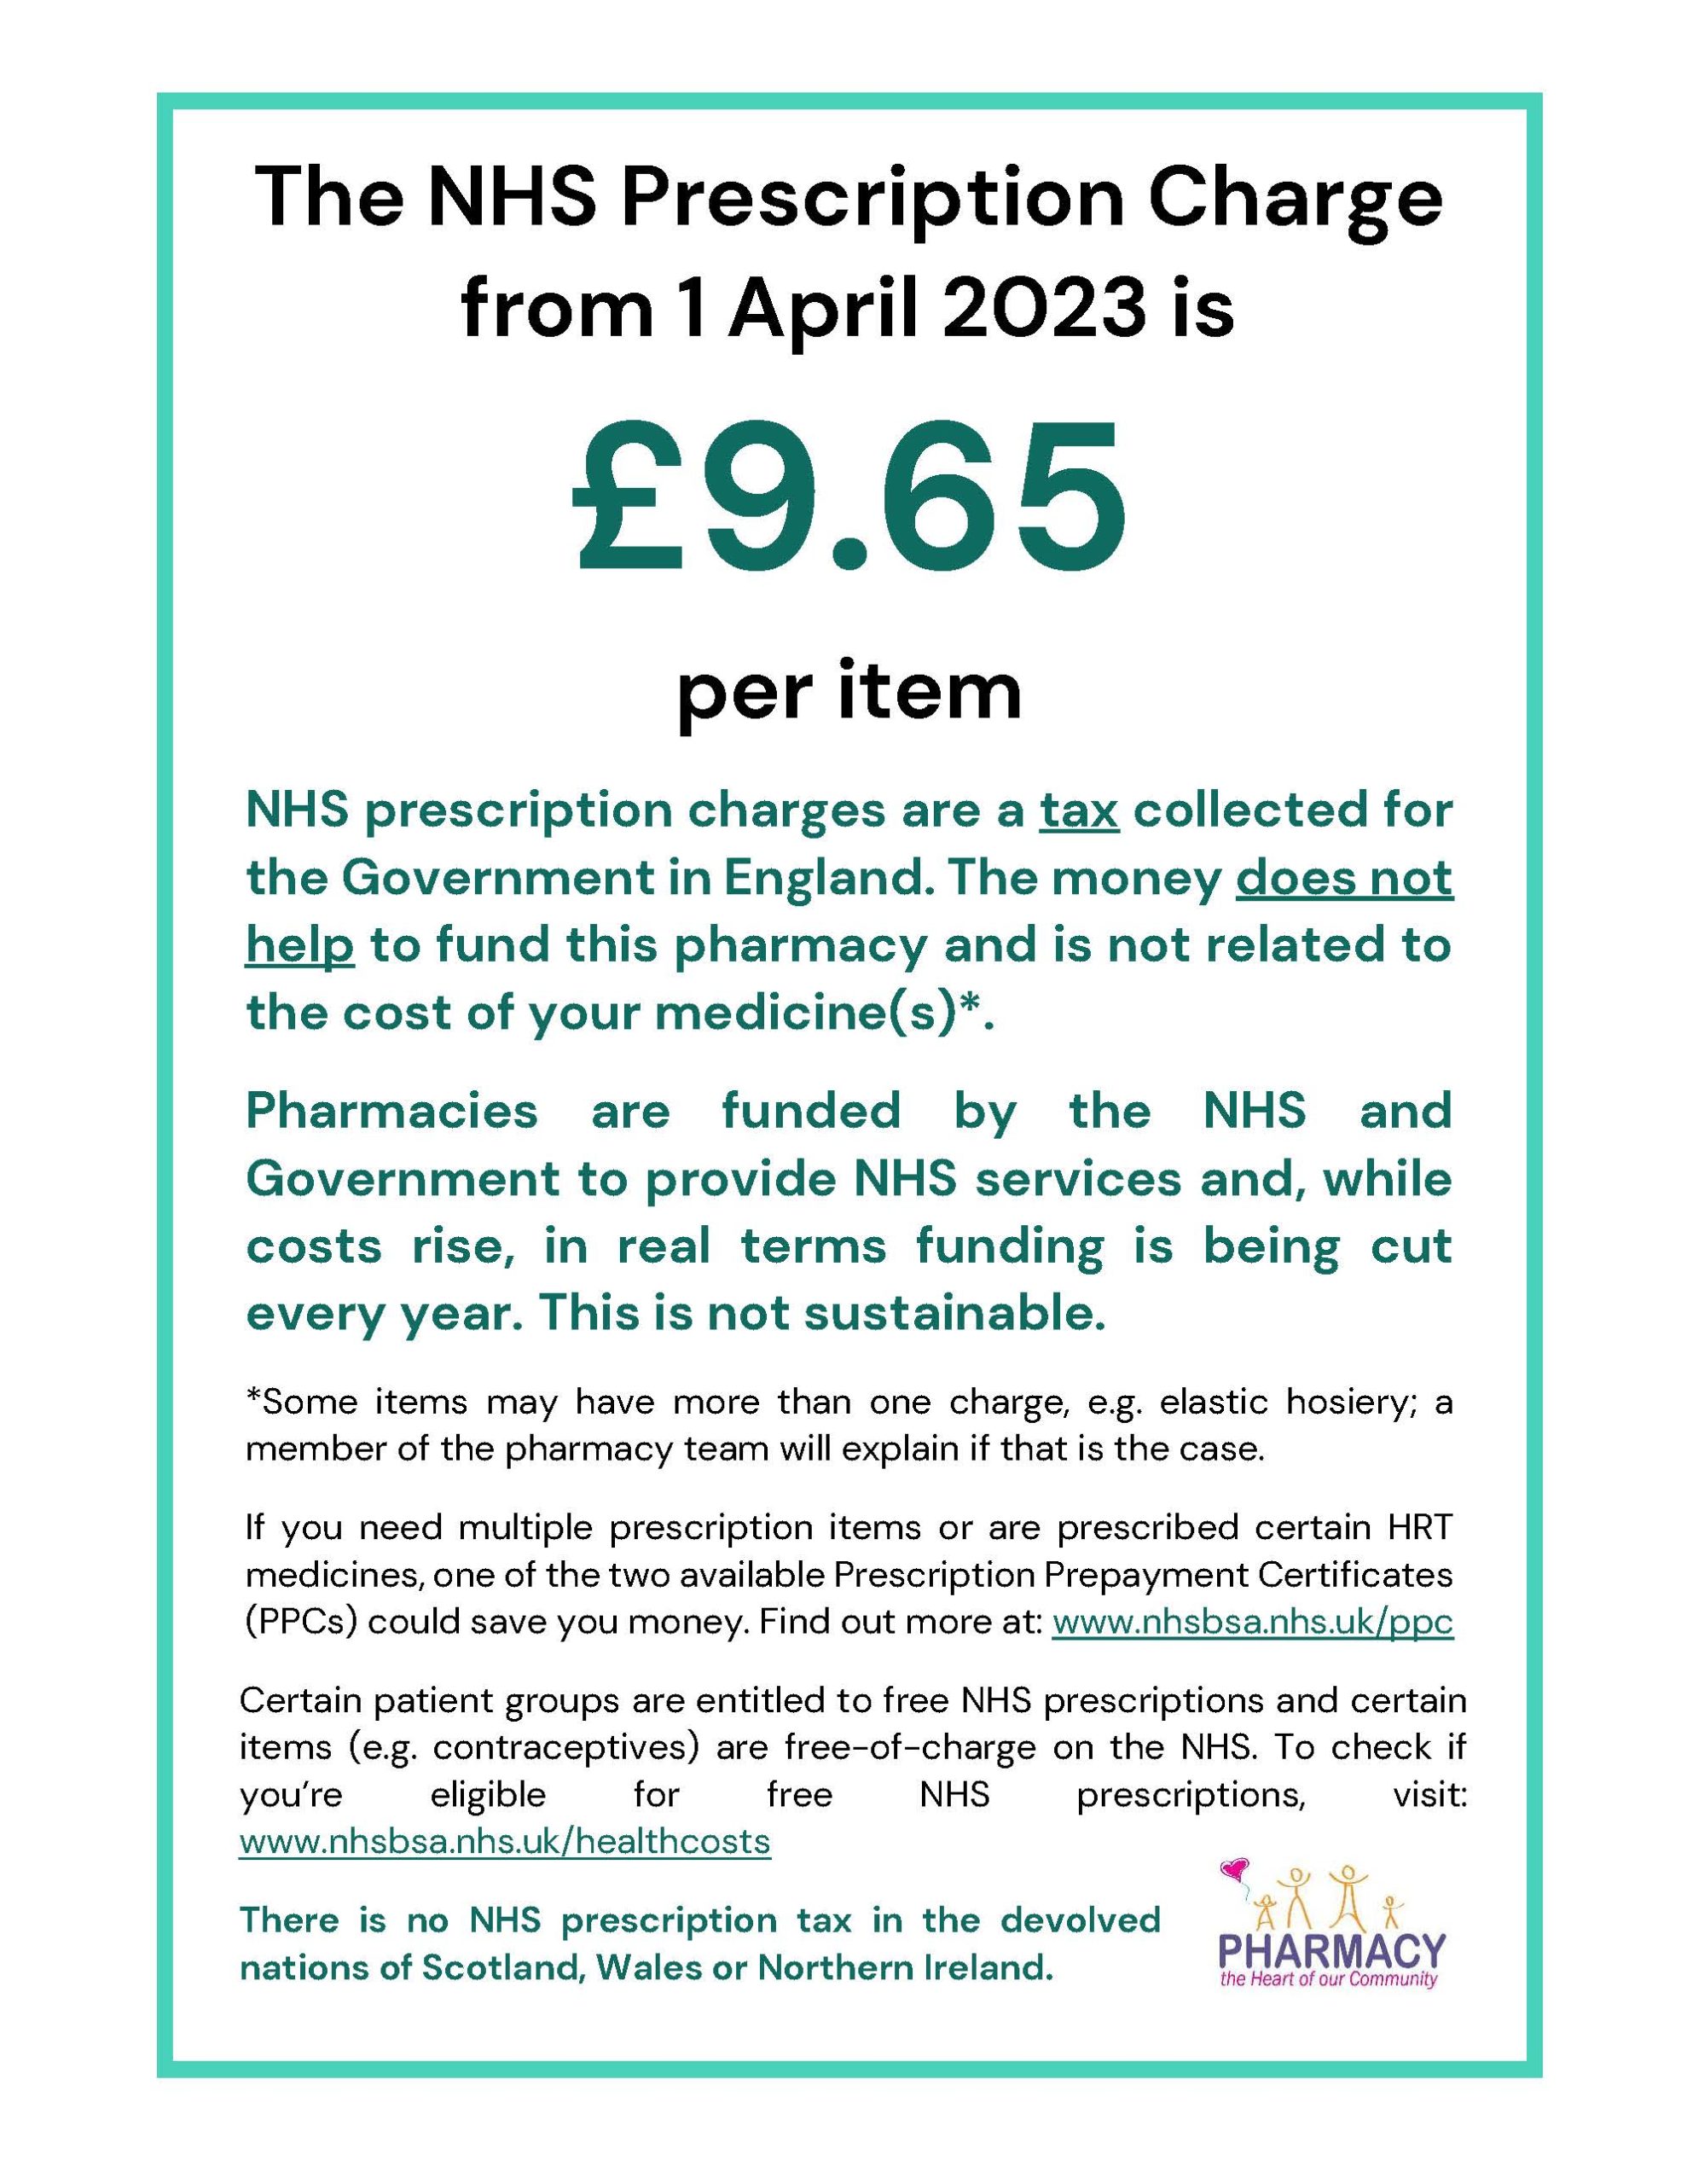 NHS Prescription Charge from 1 April 2023